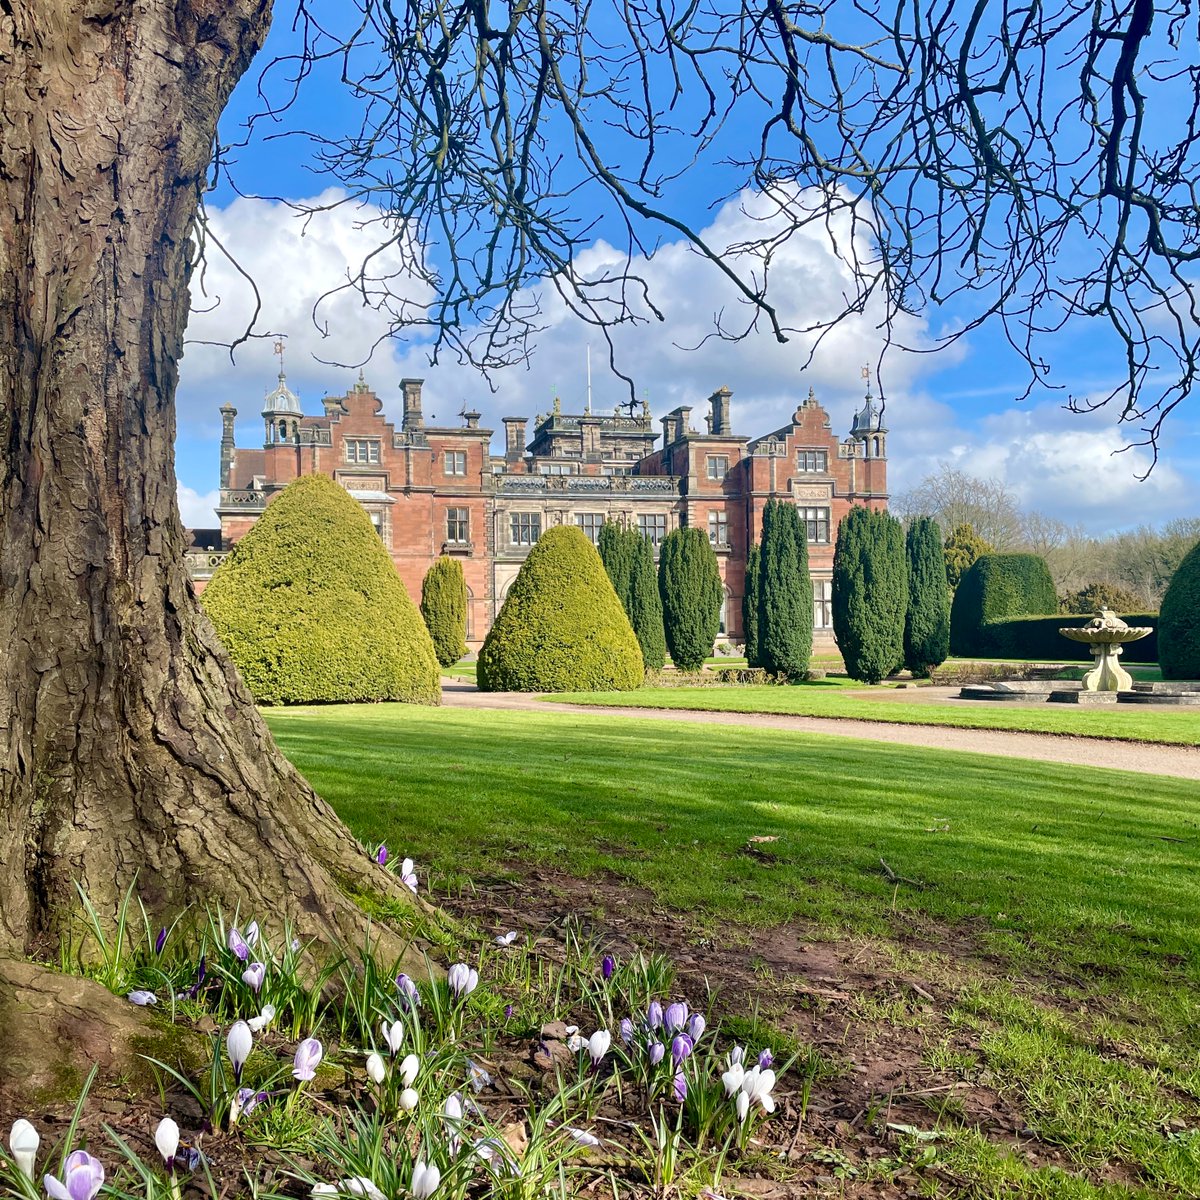 Lunchtime walks and springtime thoughts 🌷 #LoveKeele